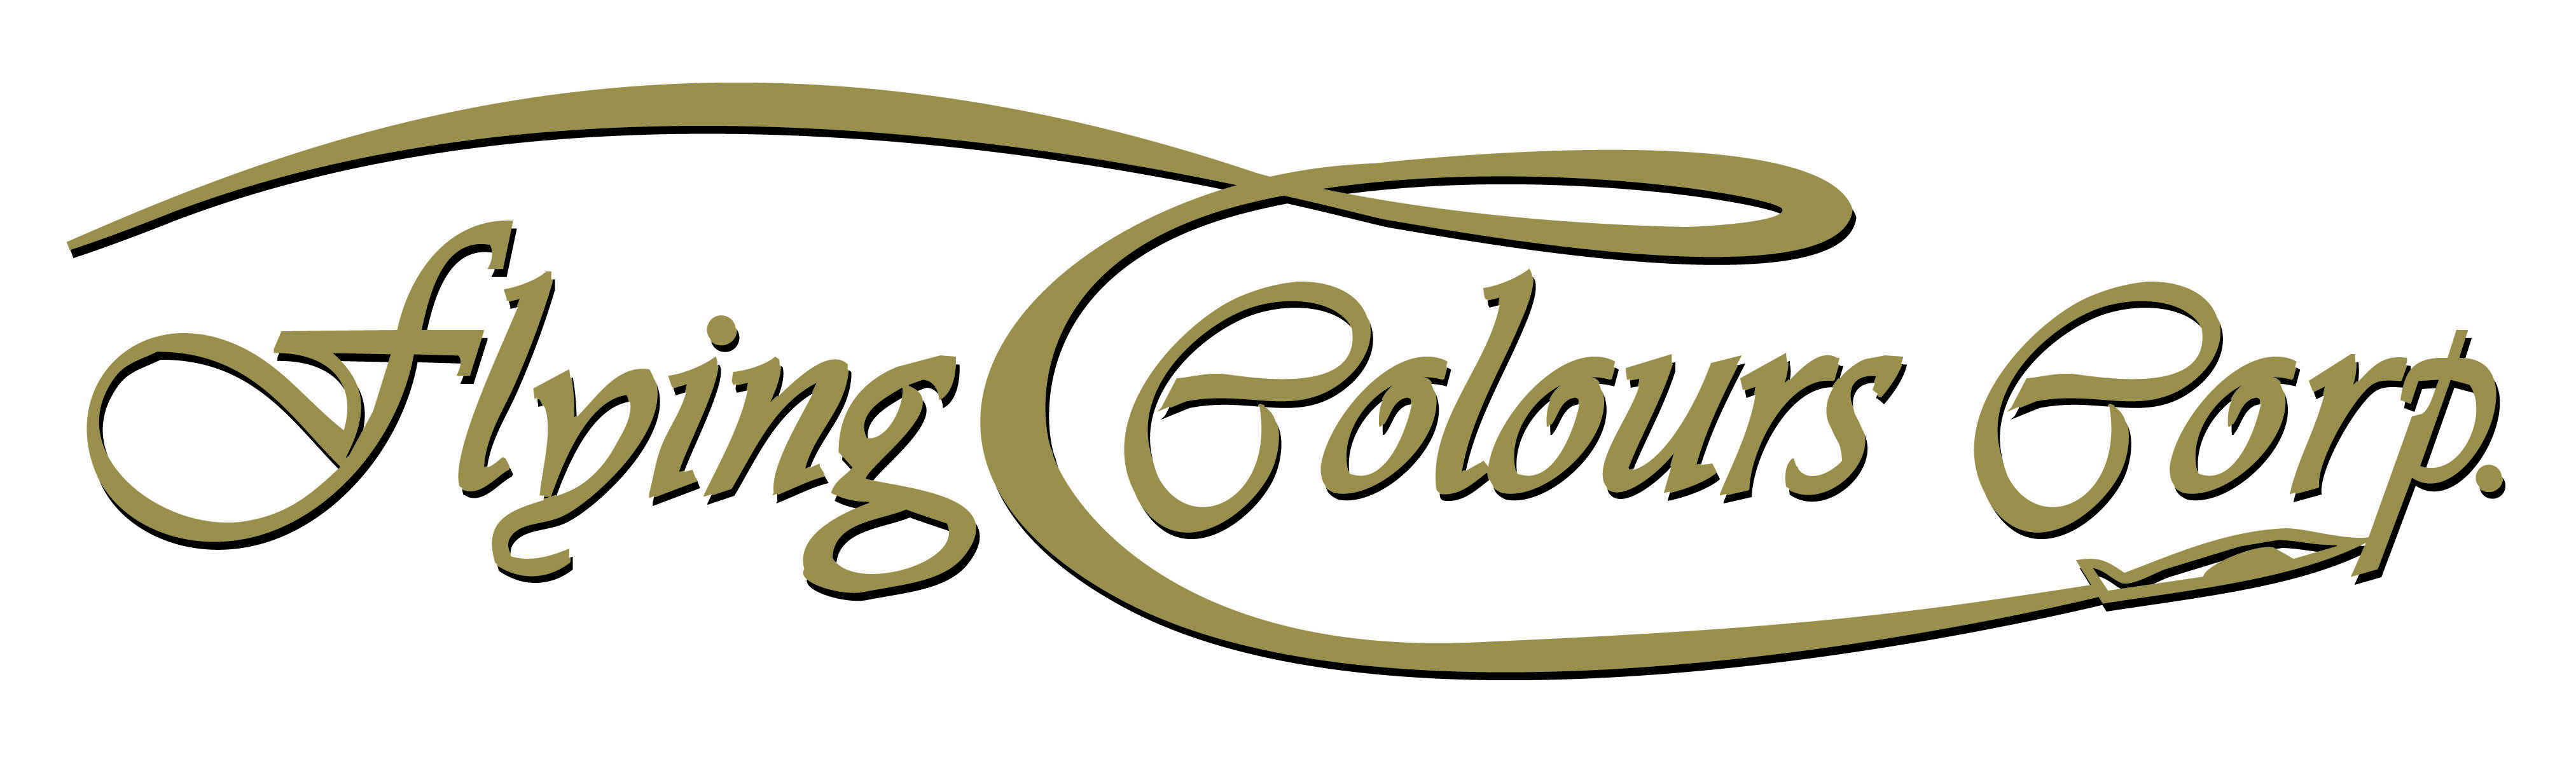 Flying Colours Corp.